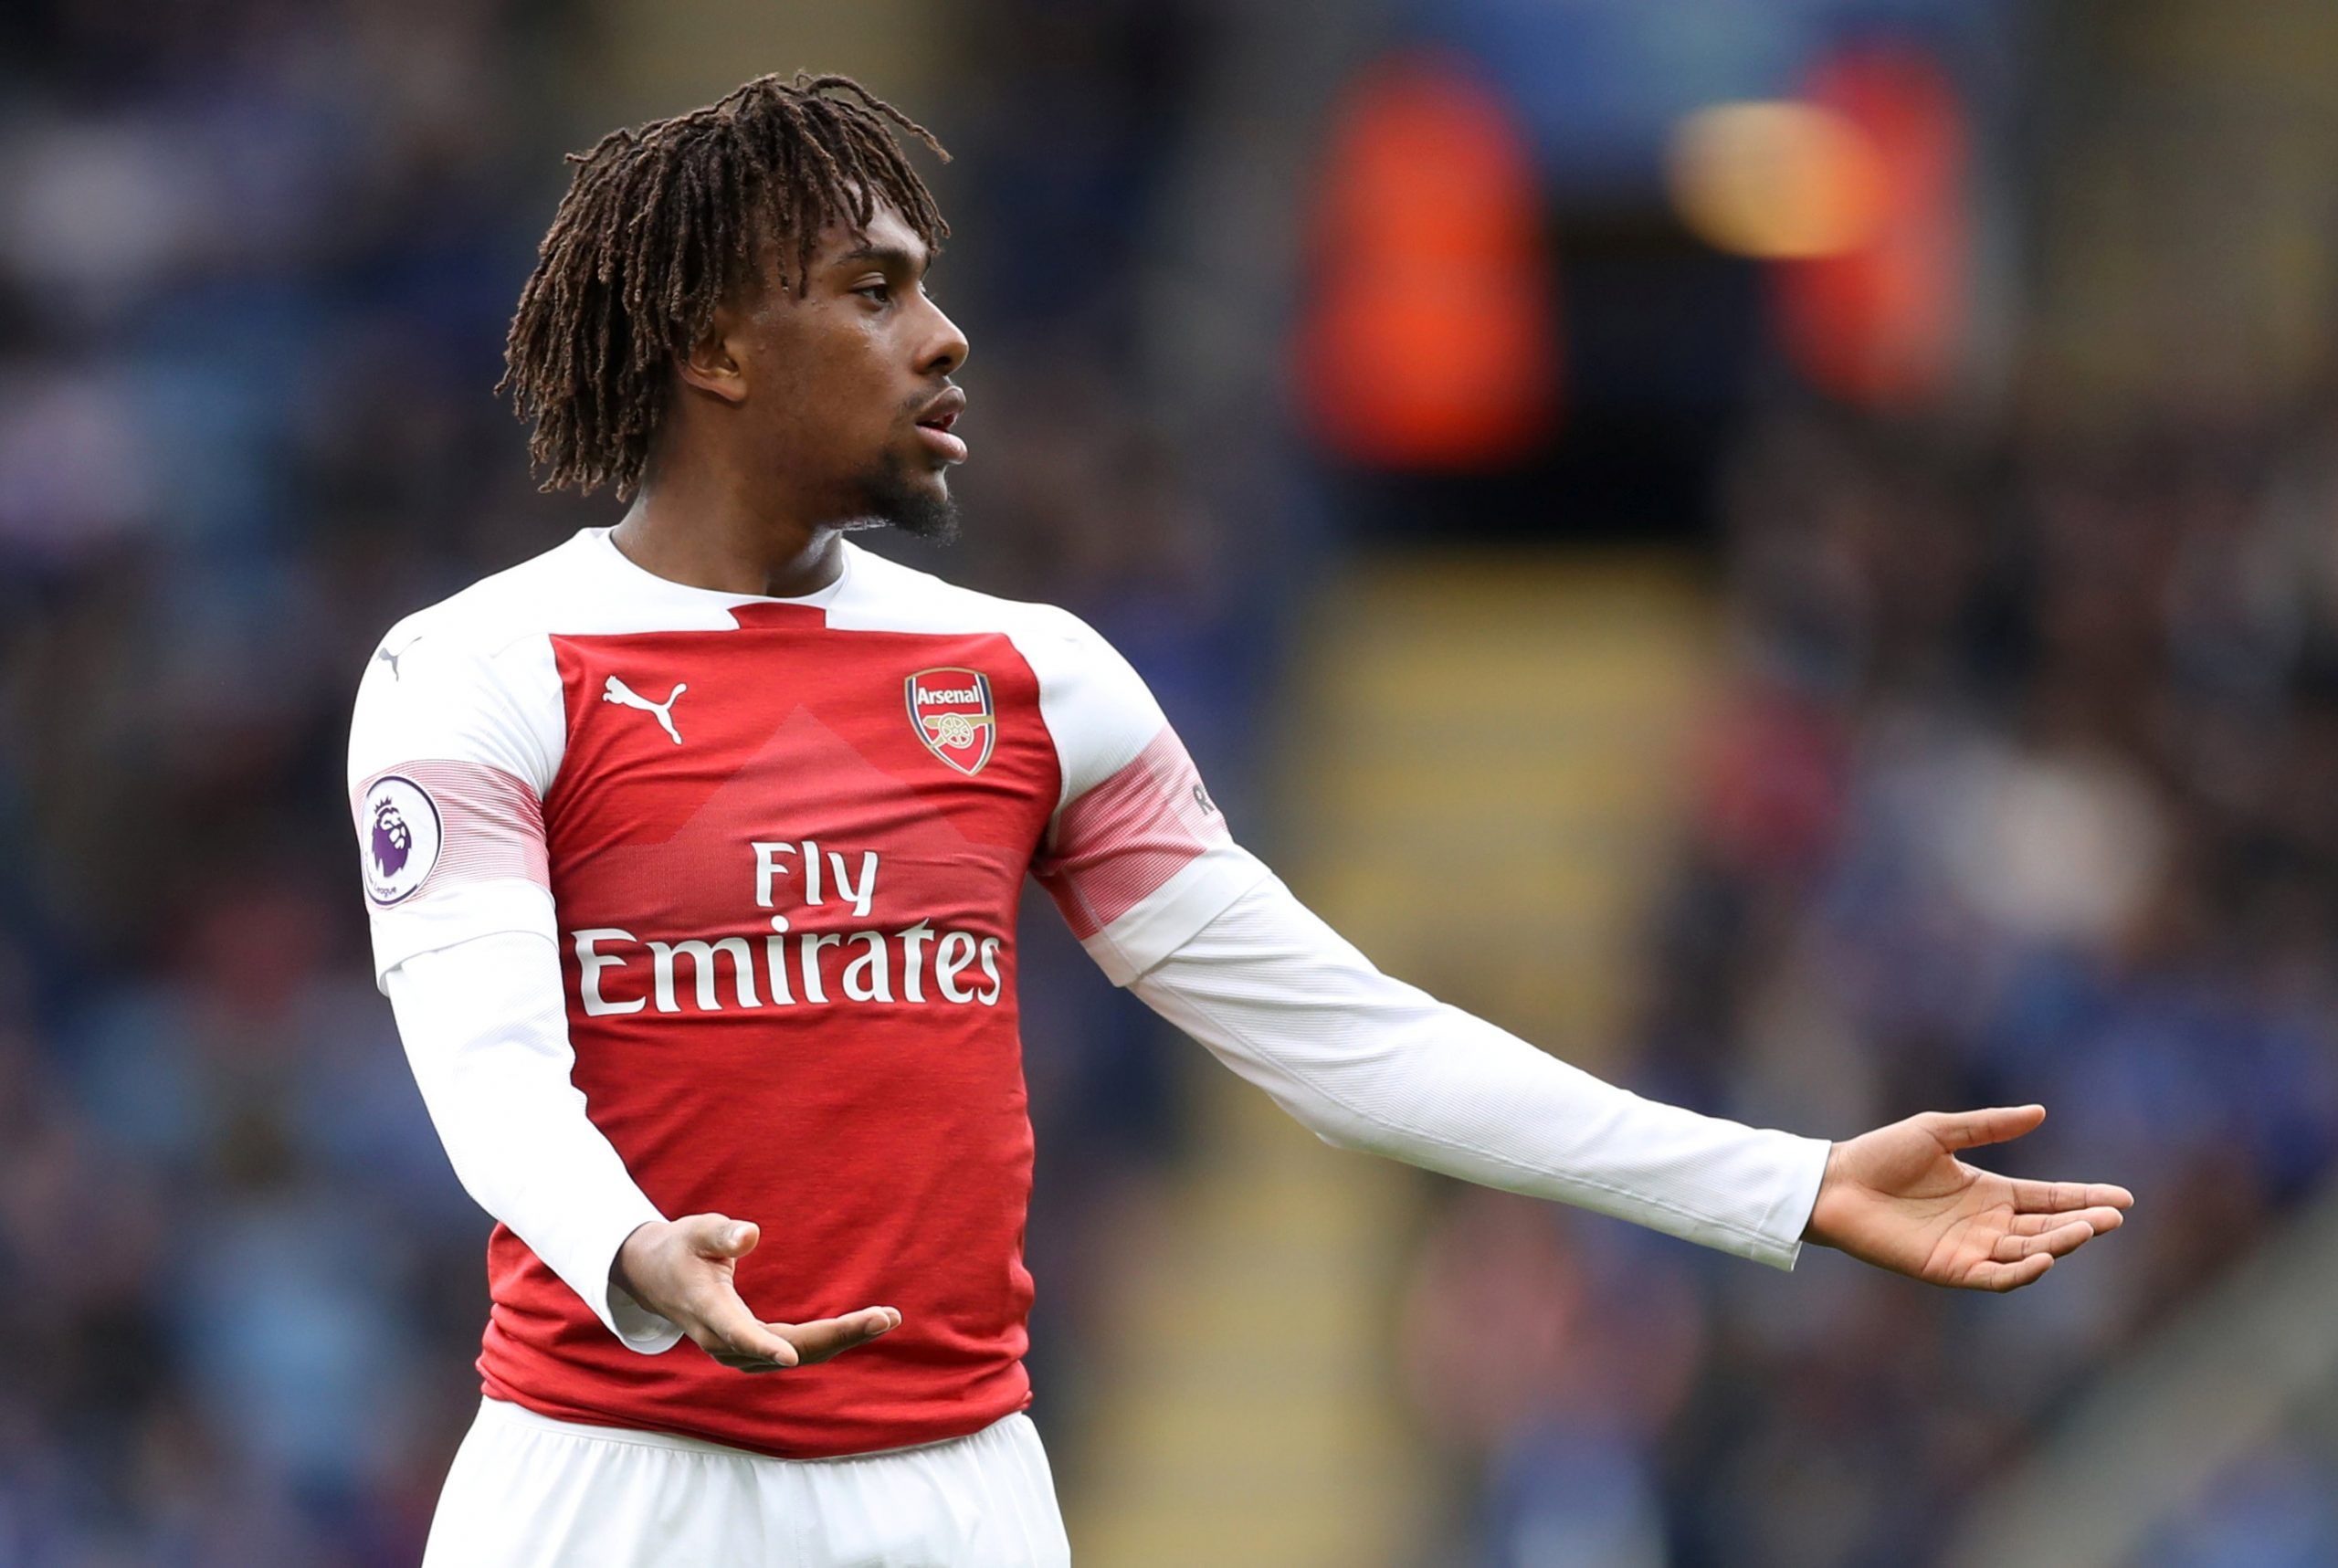 Soccer Football - Premier League - Leicester City v Arsenal - King Power Stadium, Leicester, Britain - April 28, 2019  Arsenal's Alex Iwobi reacts      Action Images via Reuters/Carl Recine  EDITORIAL USE ONLY. No use with unauthorized audio, video, data, fixture lists, club/league logos or 